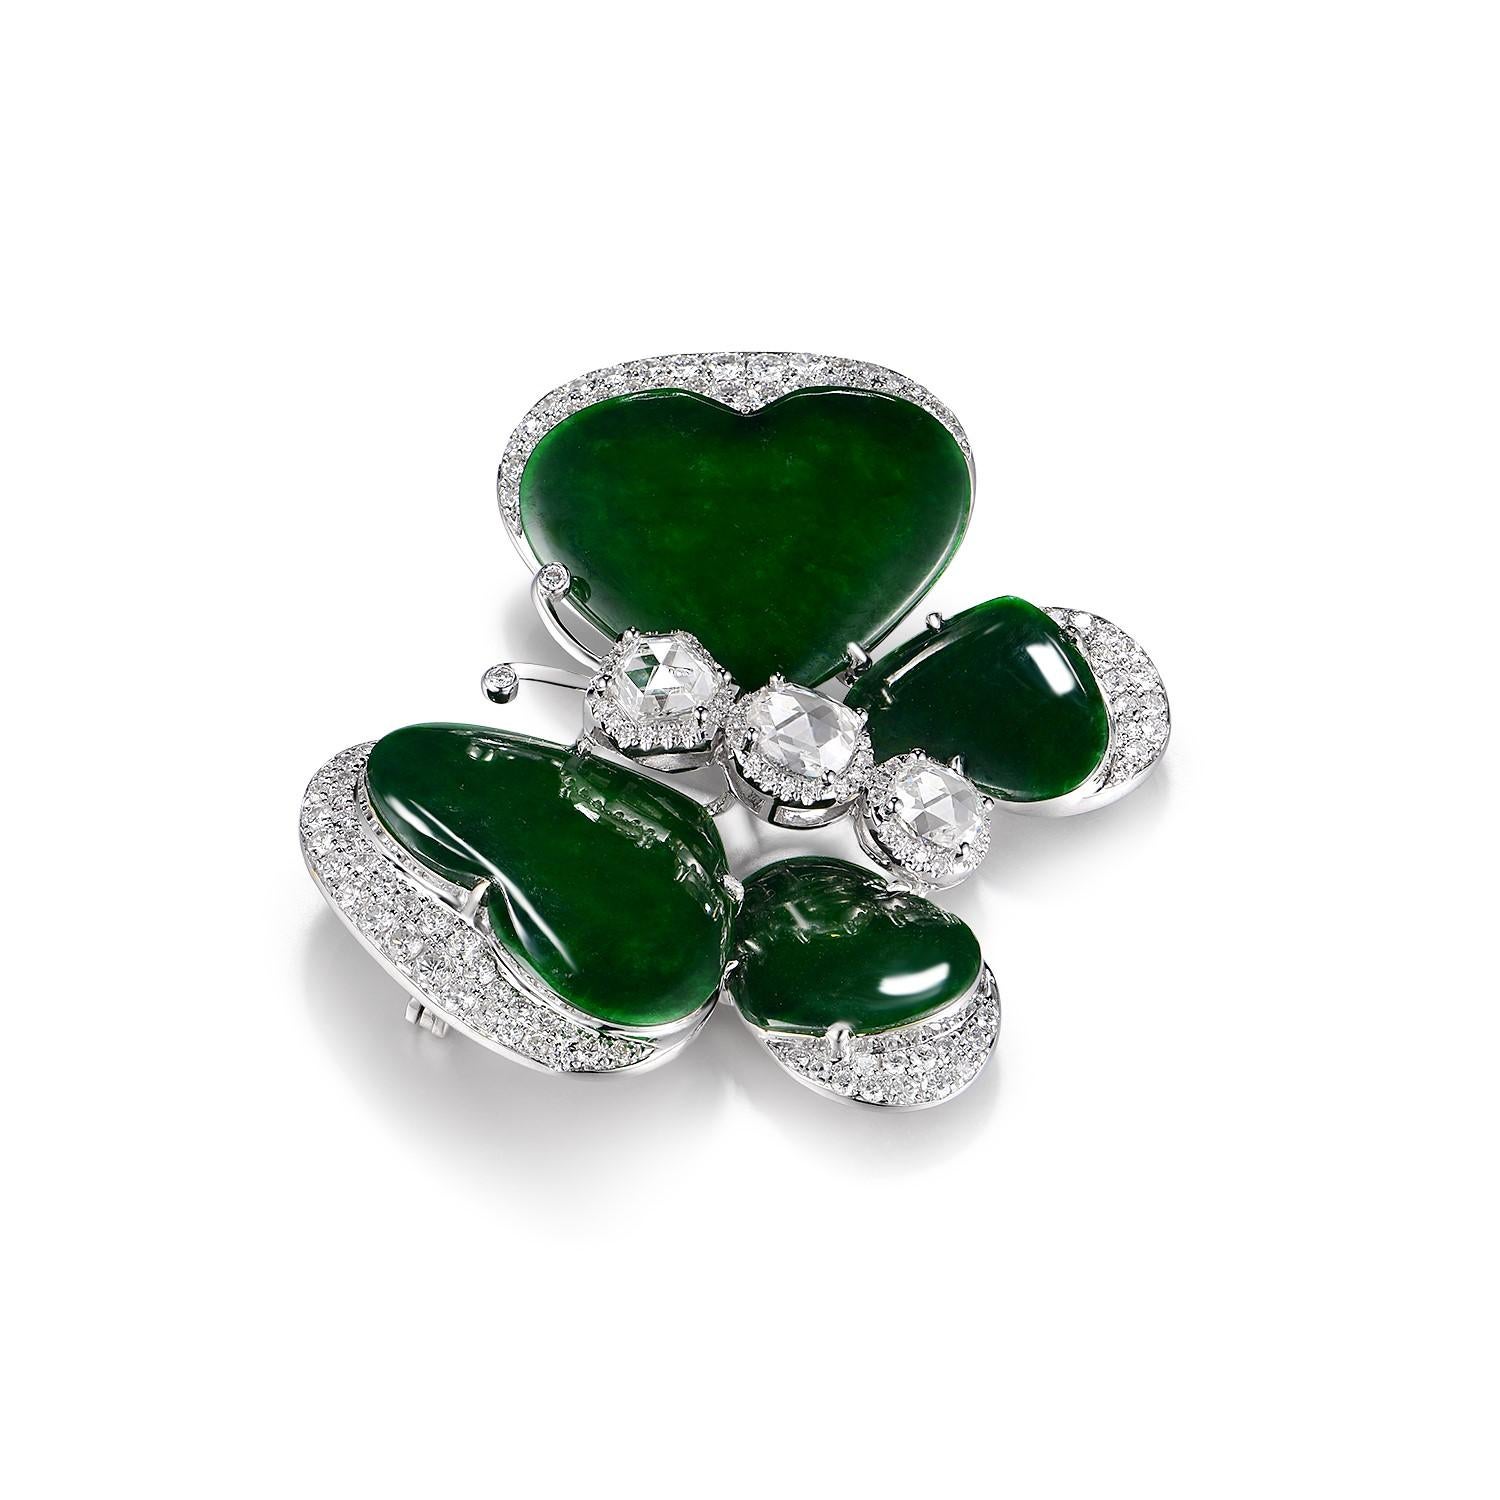 Embrace the elegance of nature with this exquisite butterfly brooch, impeccably crafted in pristine 18K white gold. The wings, delicately shaped from luxurious jadeite weighing 5.30ct, showcase a mesmerizing deep green hue, reminiscent of enchanted